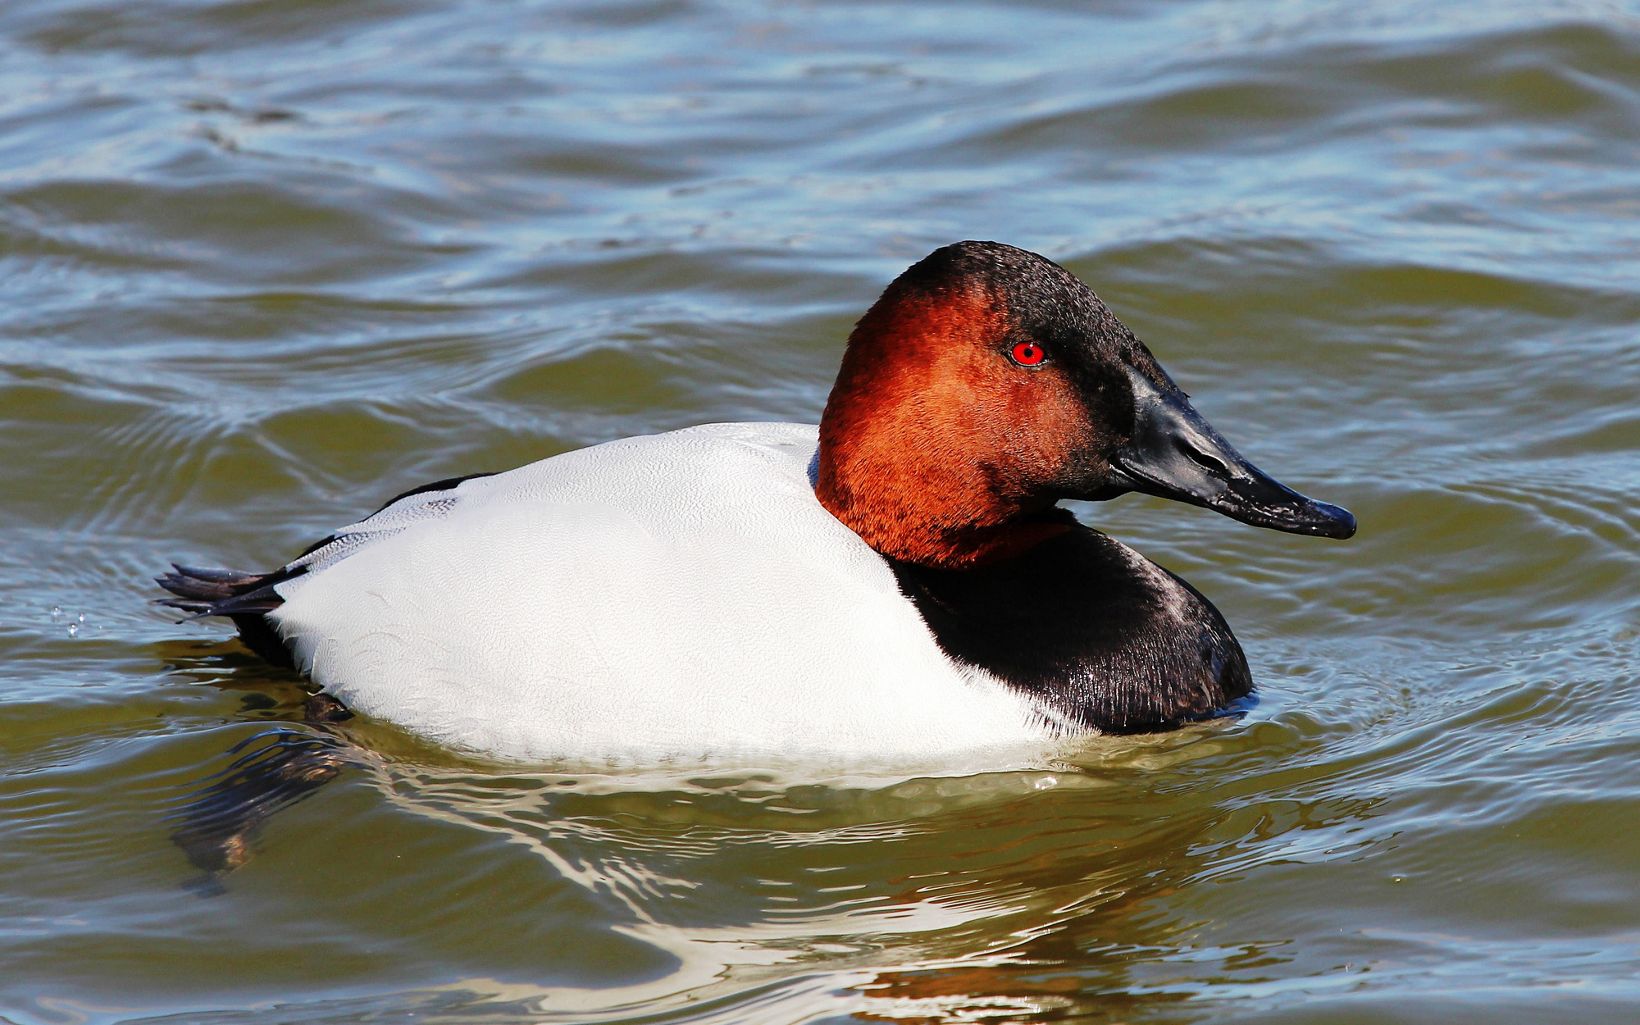 A duck with a red head floats on the water.